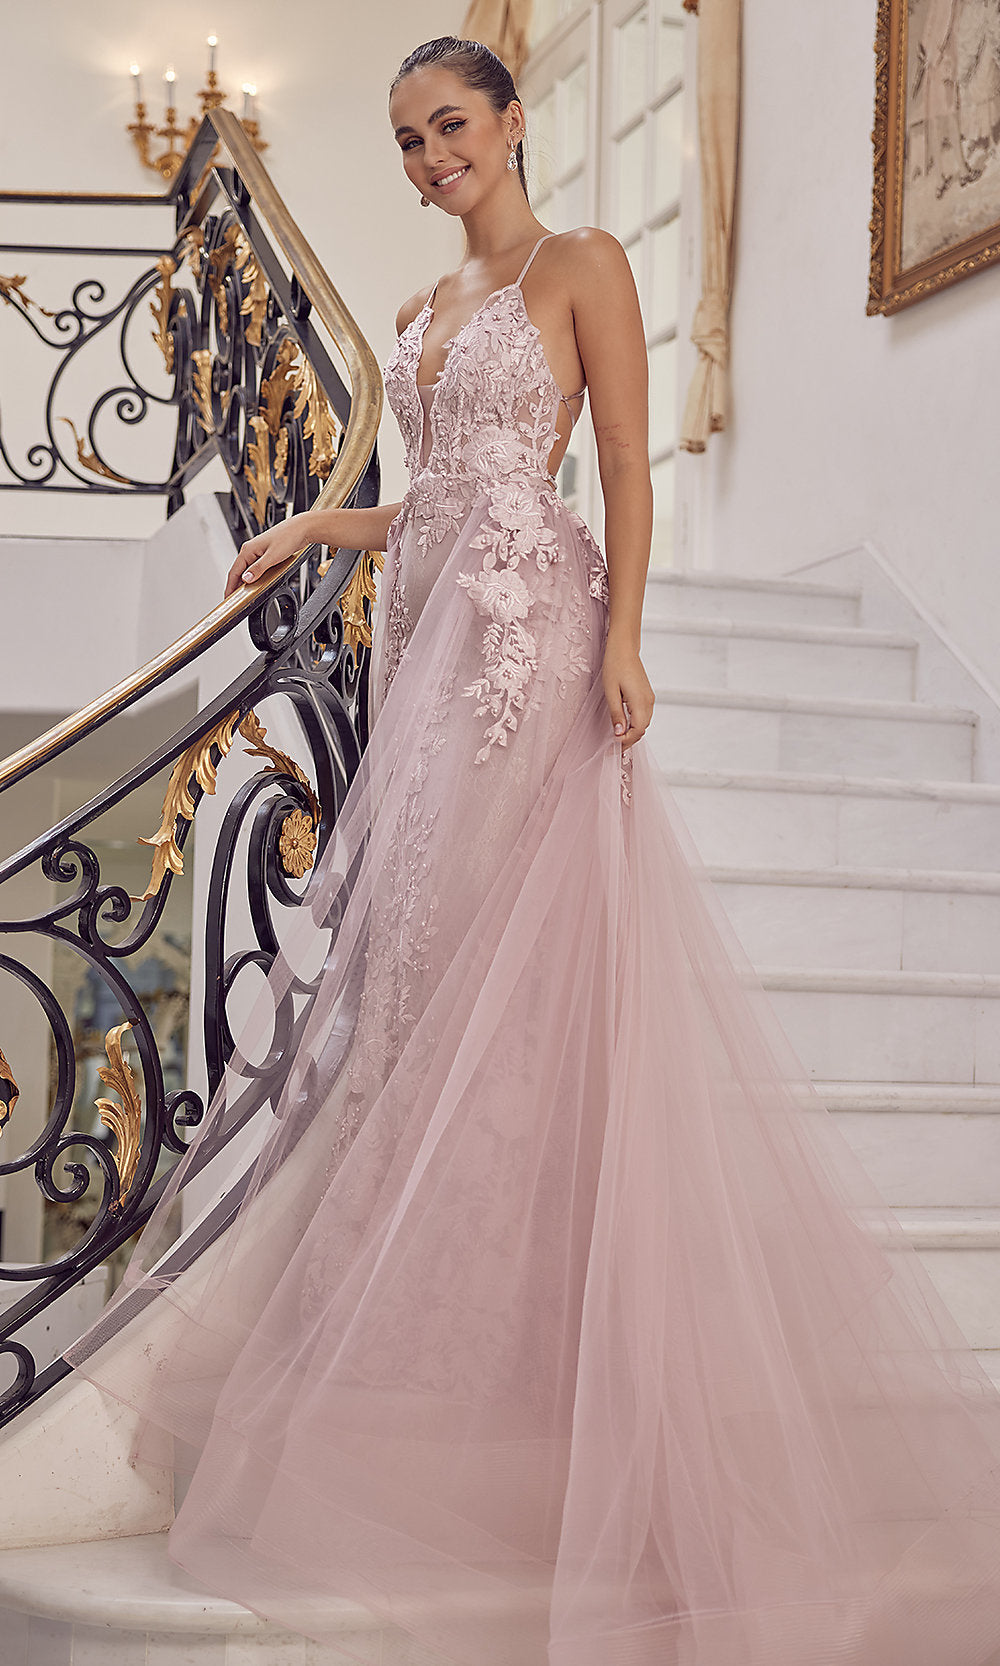 Romantic Evening Dresses, Style Prom Dress, Blush Pink Tulle Evening Gowns, Evening  Dress,p on Luulla